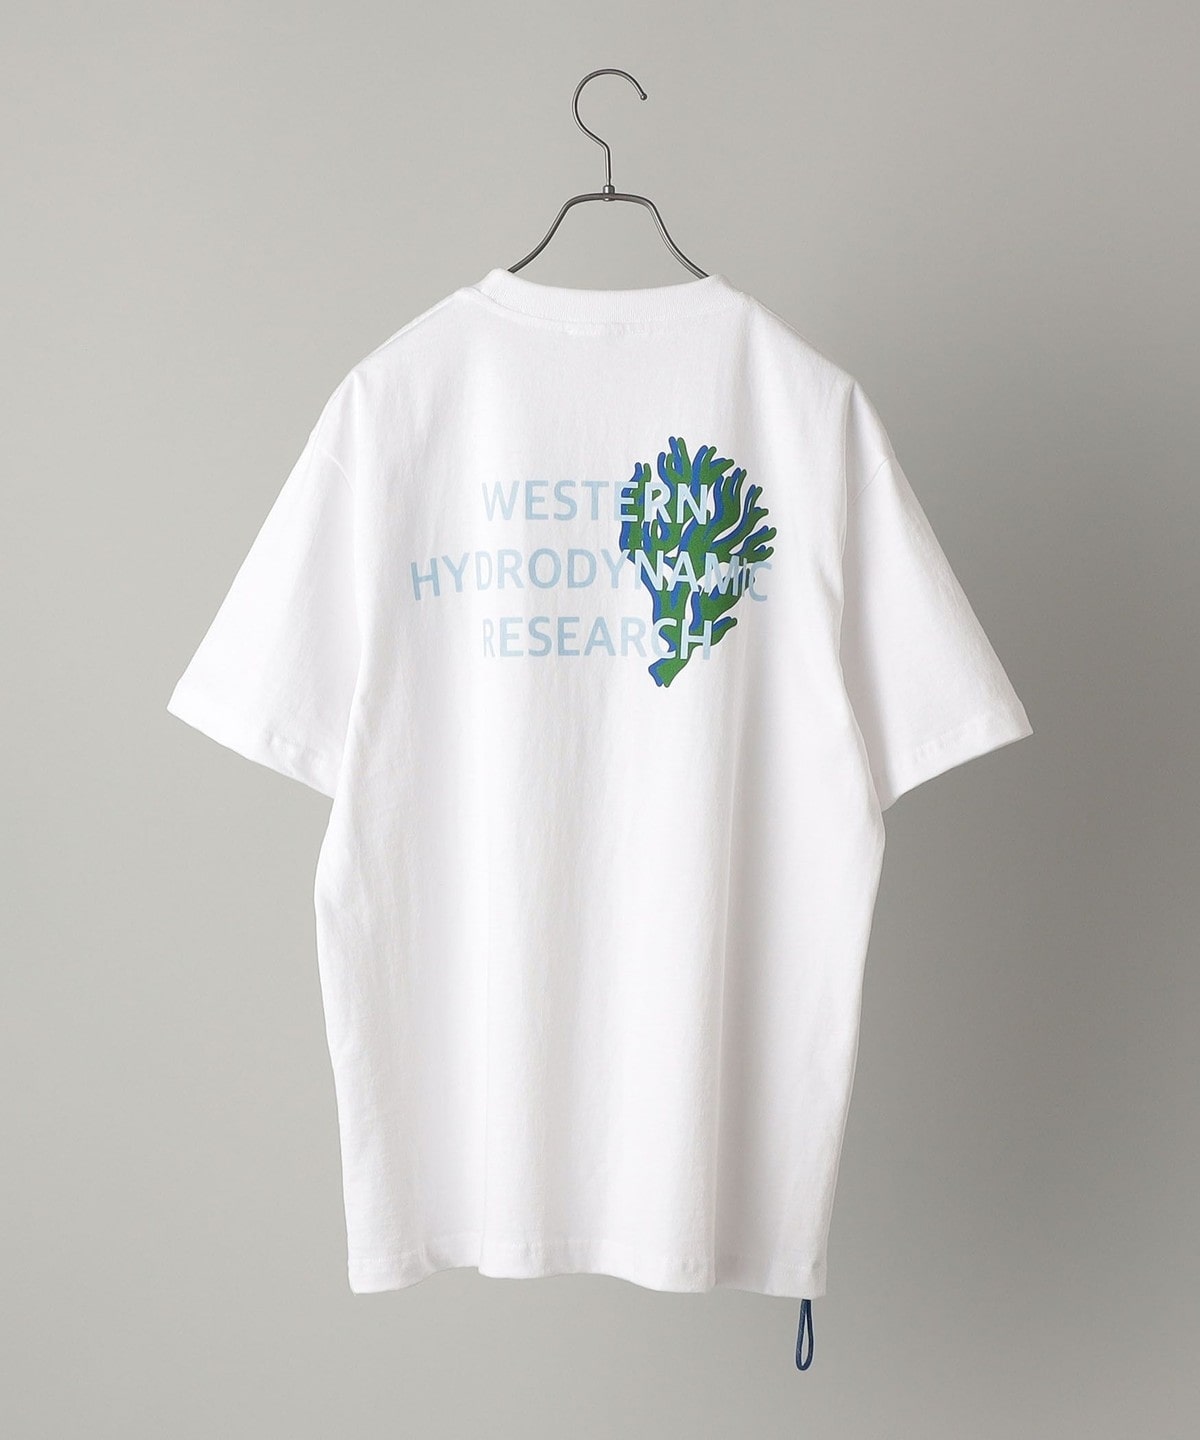 western hydrodynamic research: SEA VIEW TEE: Tシャツ/カットソー